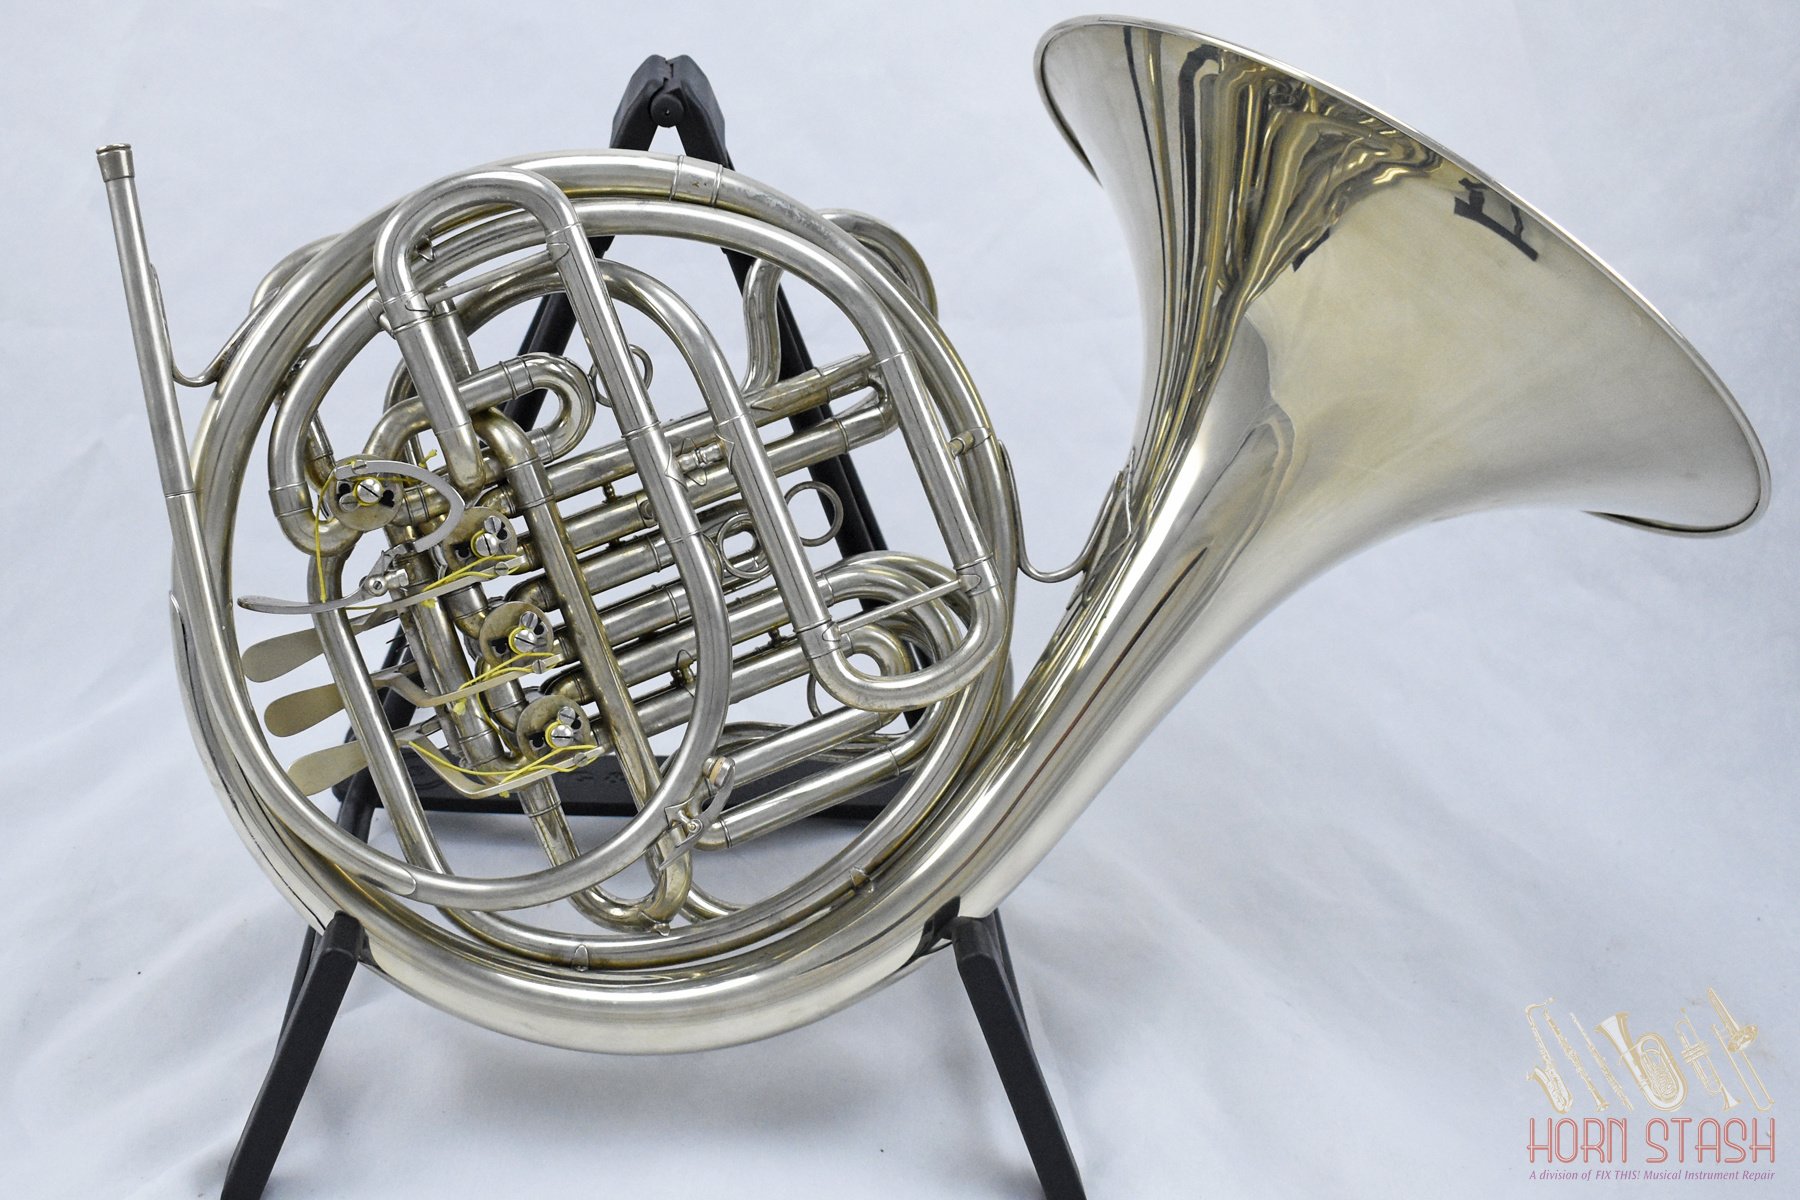 Holton Used Holton H177 Double French Horn - 5004XX